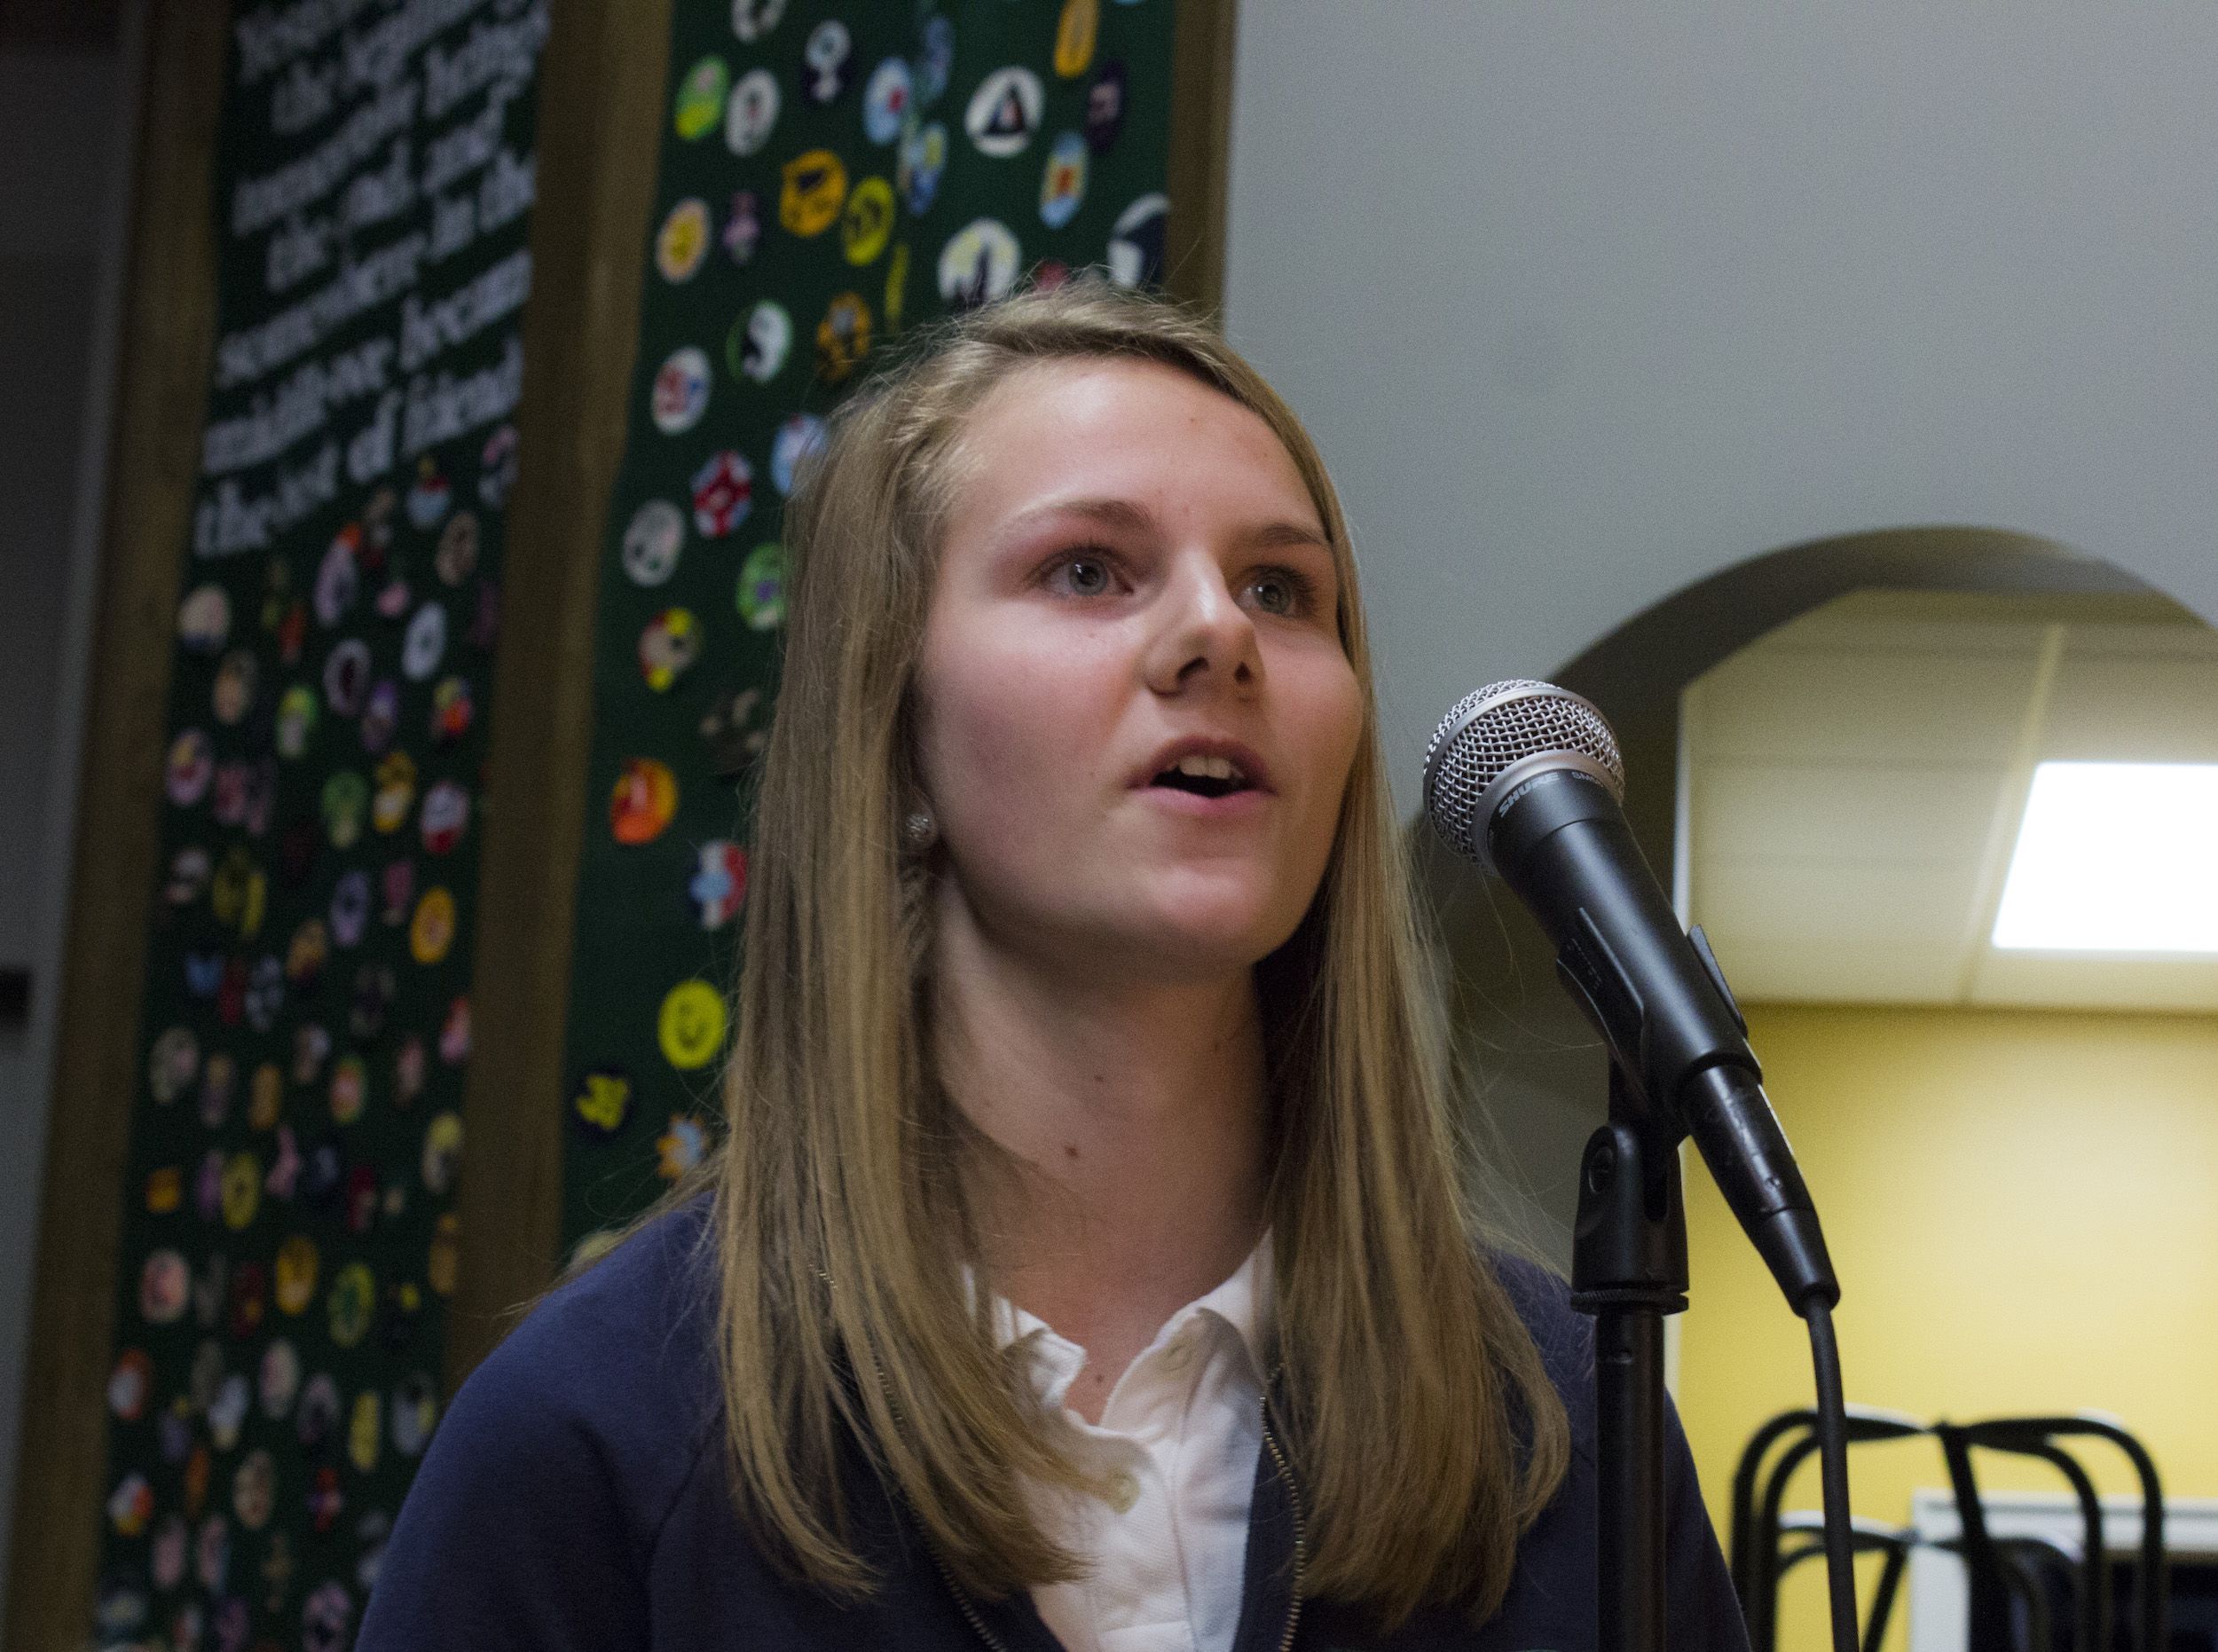 Grace Myers, a student, asks Madeleine Albright and Stephen Hadley a question about the Middle East Strategy Task Force, at Nerinx Hall High School in St. Louis, Missouri. Image by Lauren Shepherd, United States, 2017.